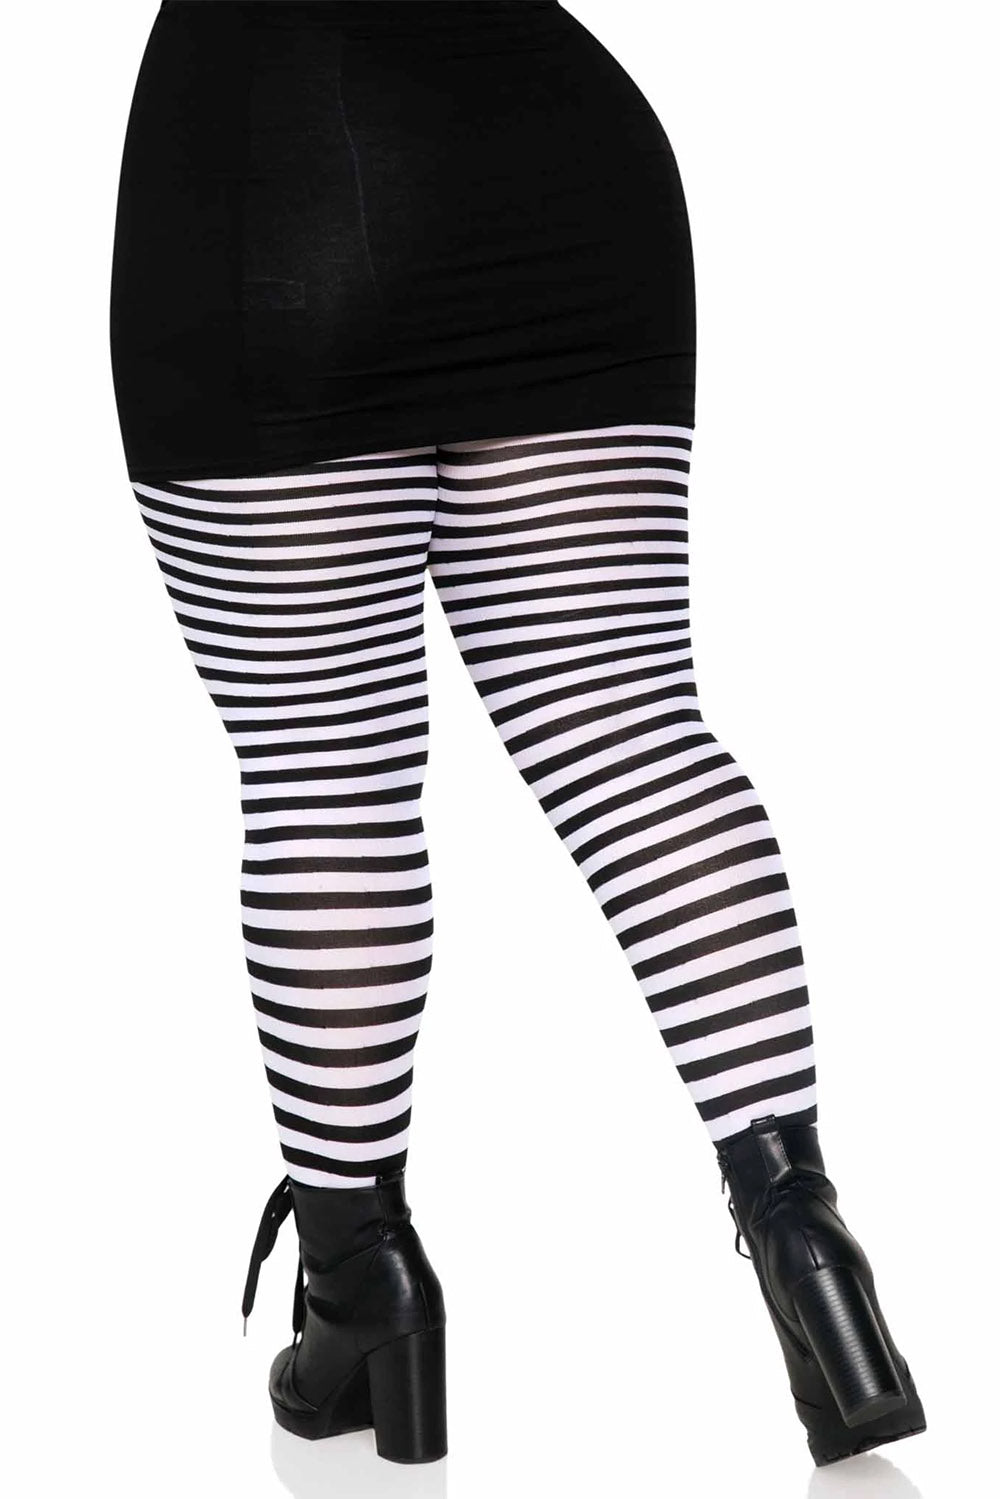 Black and White Plus Size Striped Tights